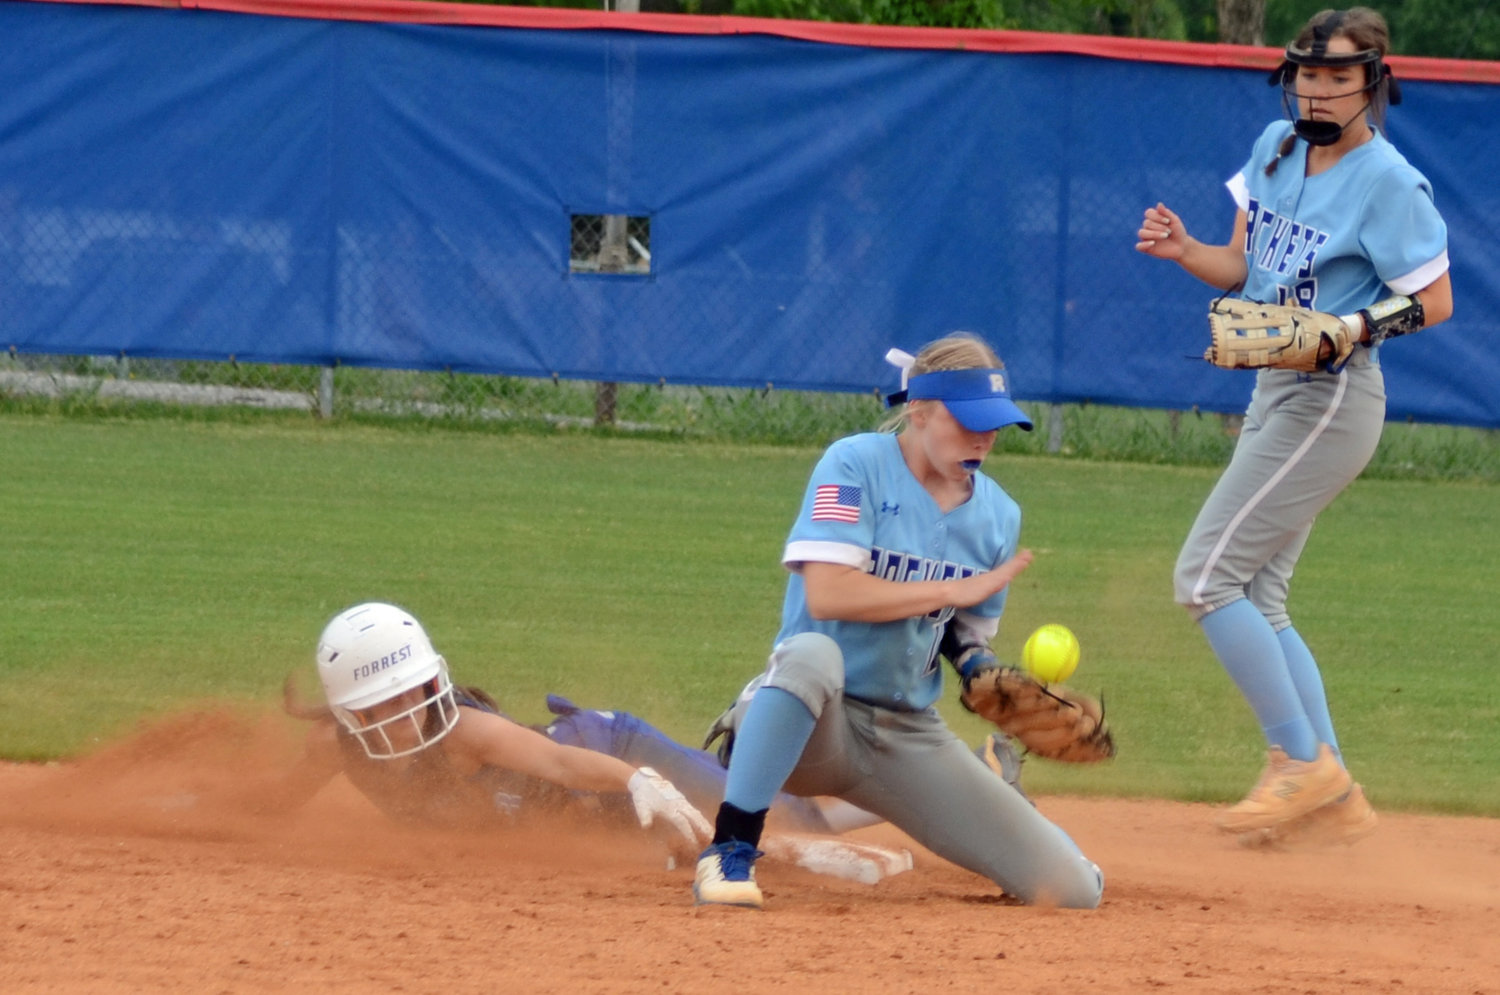 Addi Bunty steals second base in a cloud of dust in the second inning.